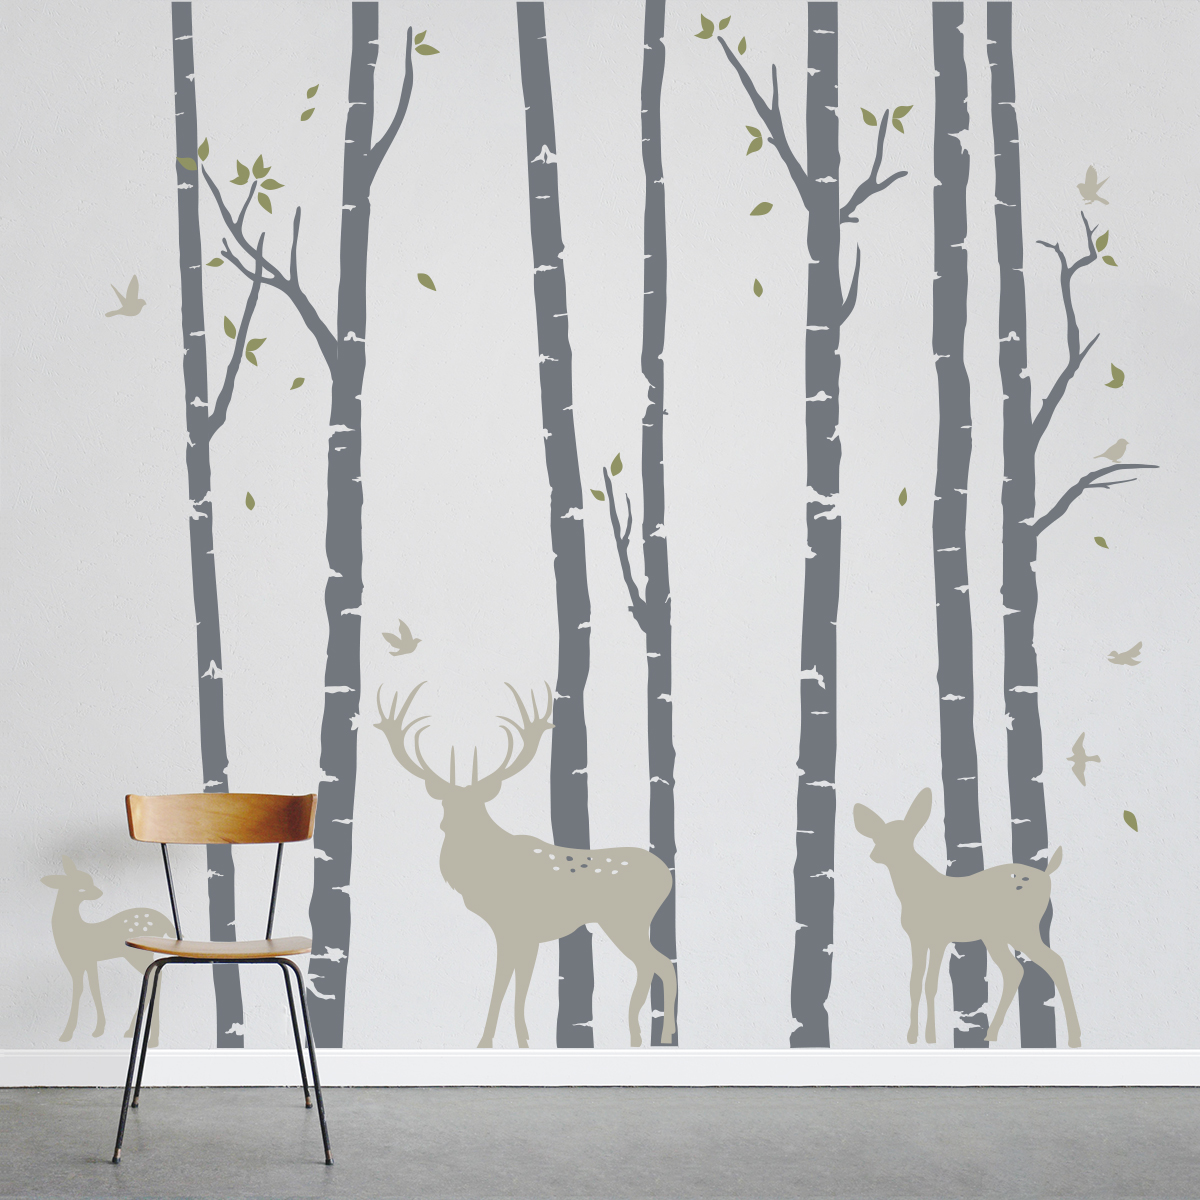 Tree Wall Decal Birch Tree Vinyl Wall Decals Wall Decal